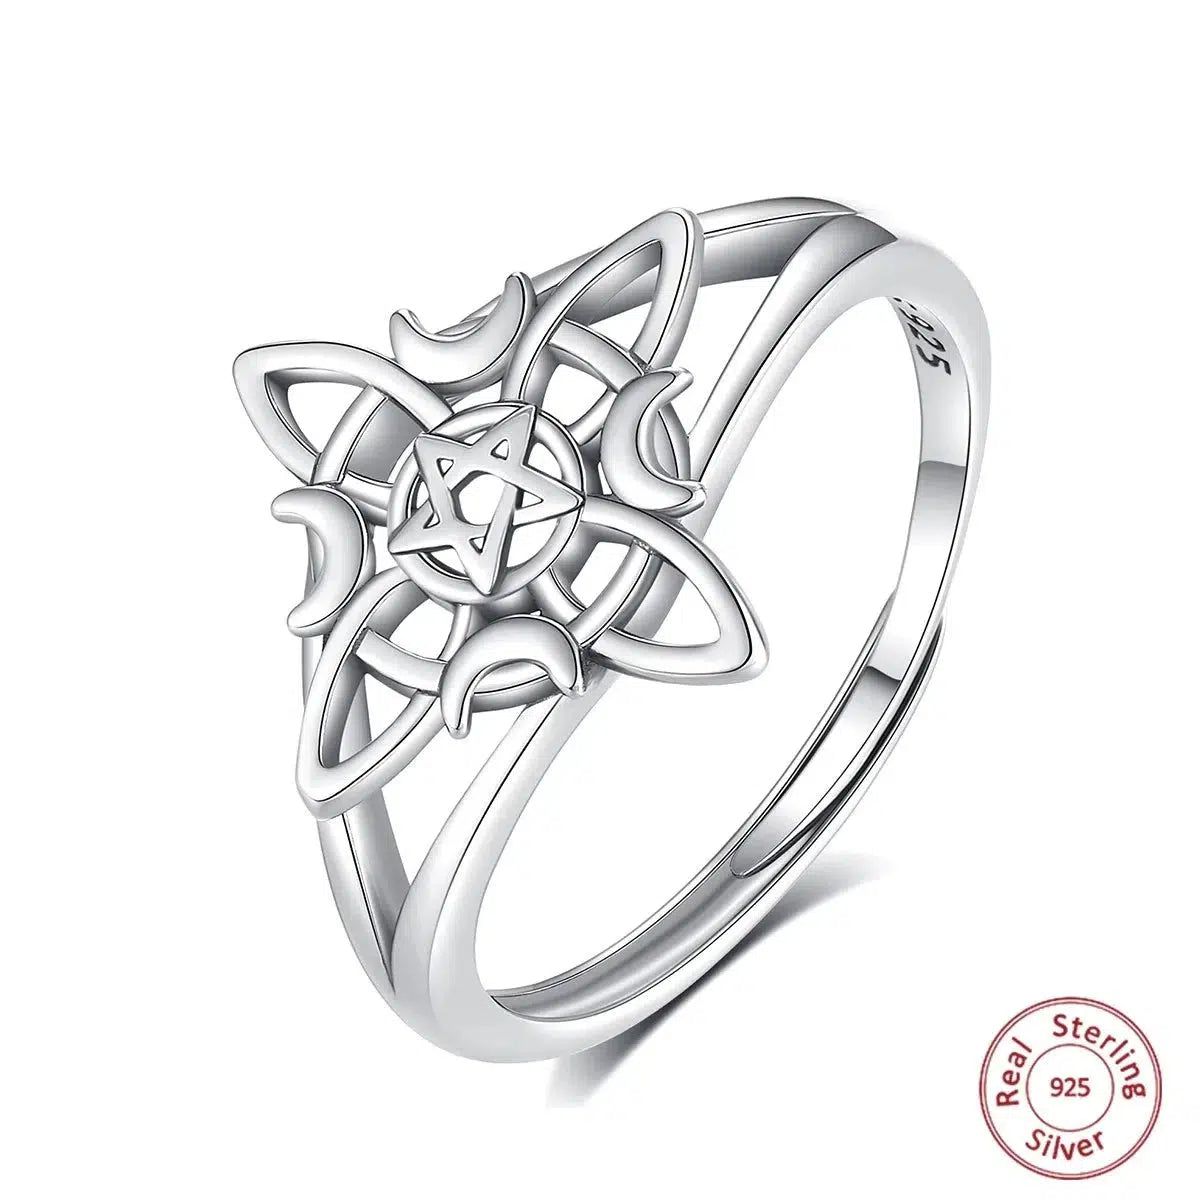 Celtic Knot Witchcraft Ring Wicca Jewelry-MoonChildWorld